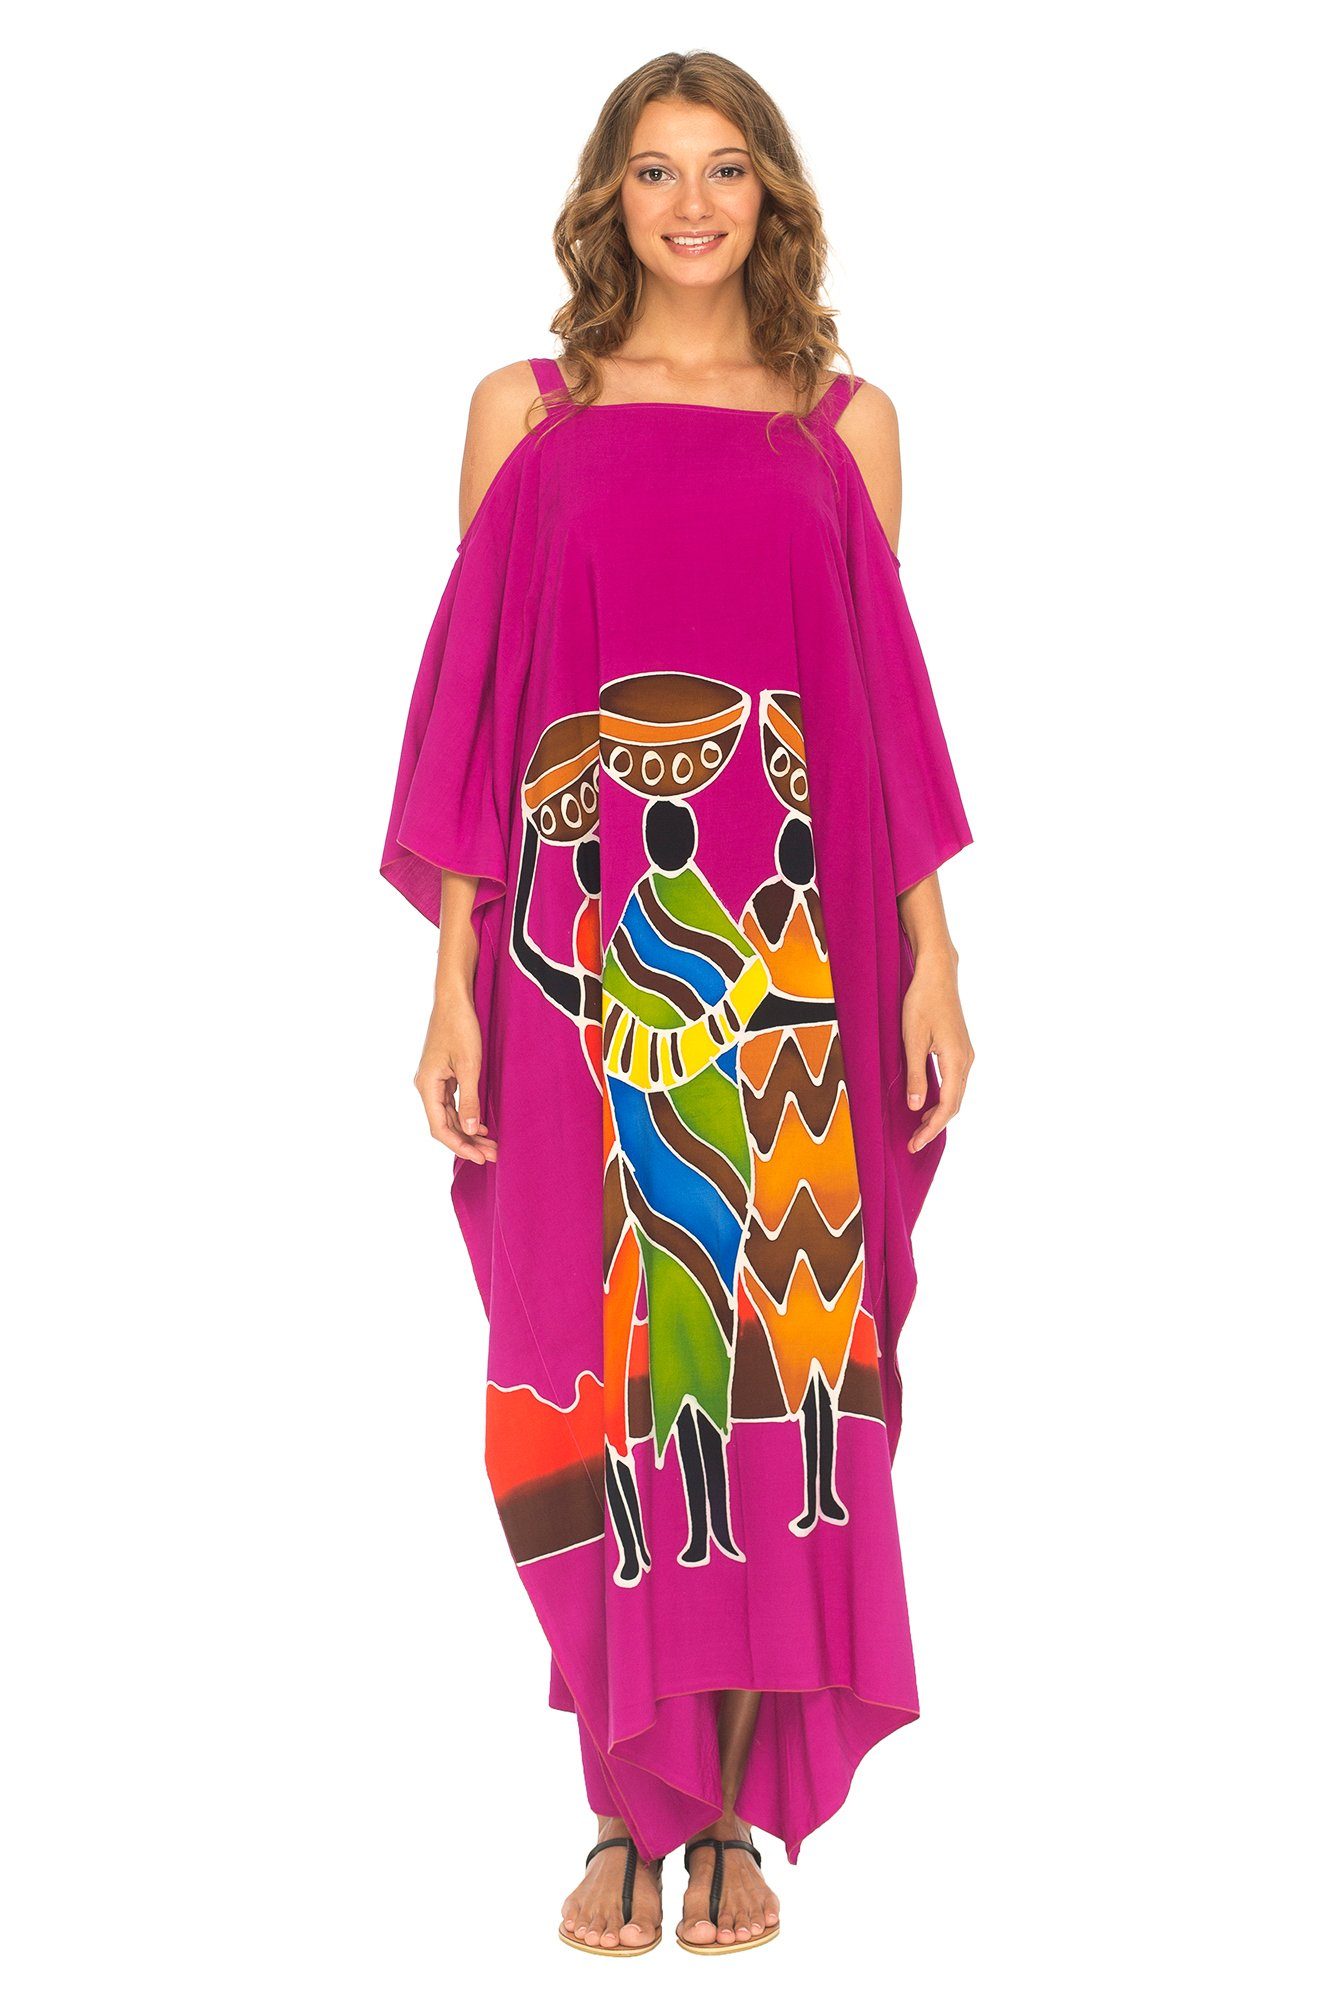 Hand Painted Tribal Design Long Dress with Cold Shoulder Cut Outs - Love-Shu-Shi